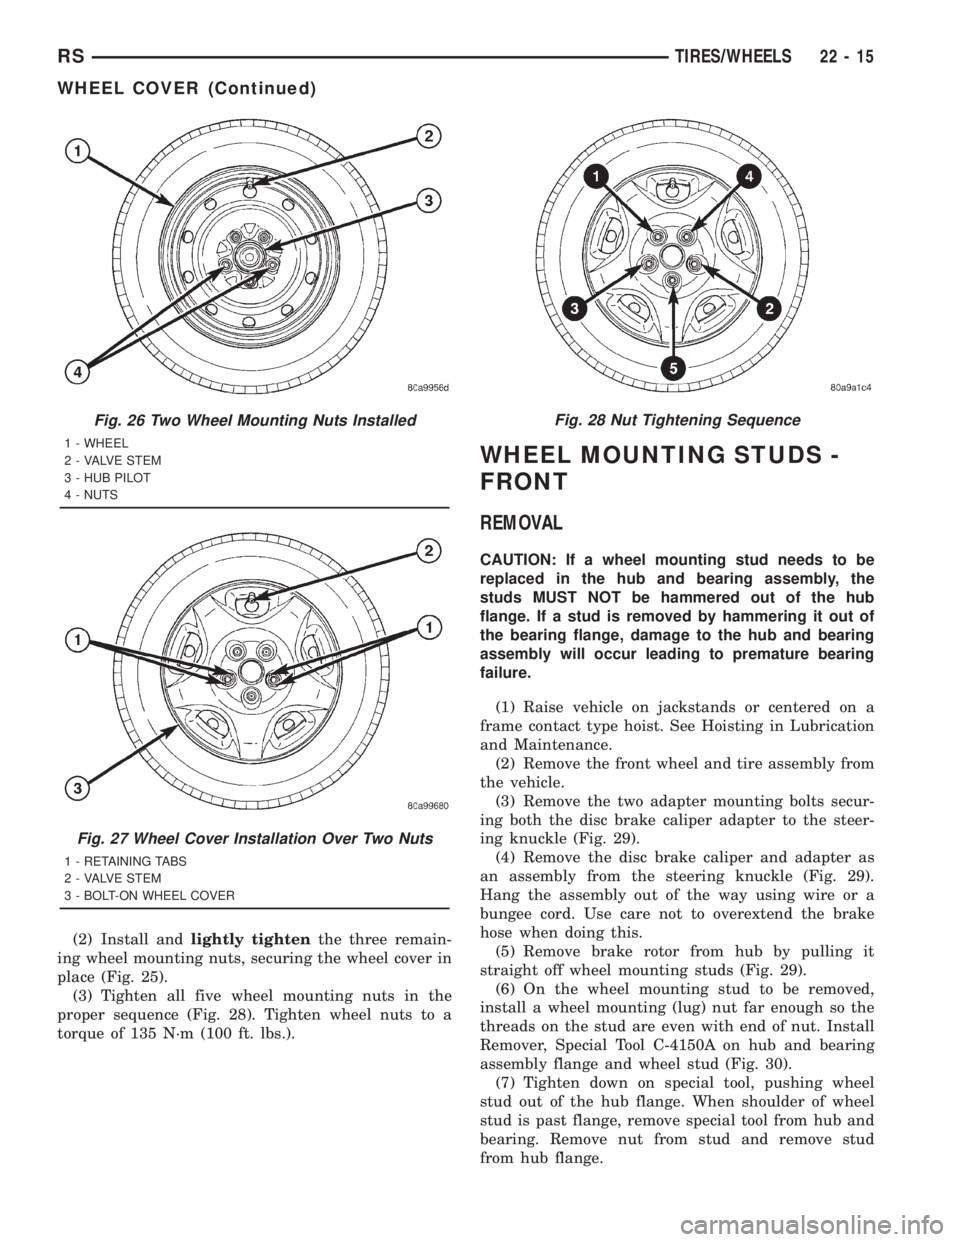 CHRYSLER VOYAGER 2001  Service Manual (2) Install andlightly tightenthe three remain-
ing wheel mounting nuts, securing the wheel cover in
place (Fig. 25).
(3) Tighten all five wheel mounting nuts in the
proper sequence (Fig. 28). Tighten